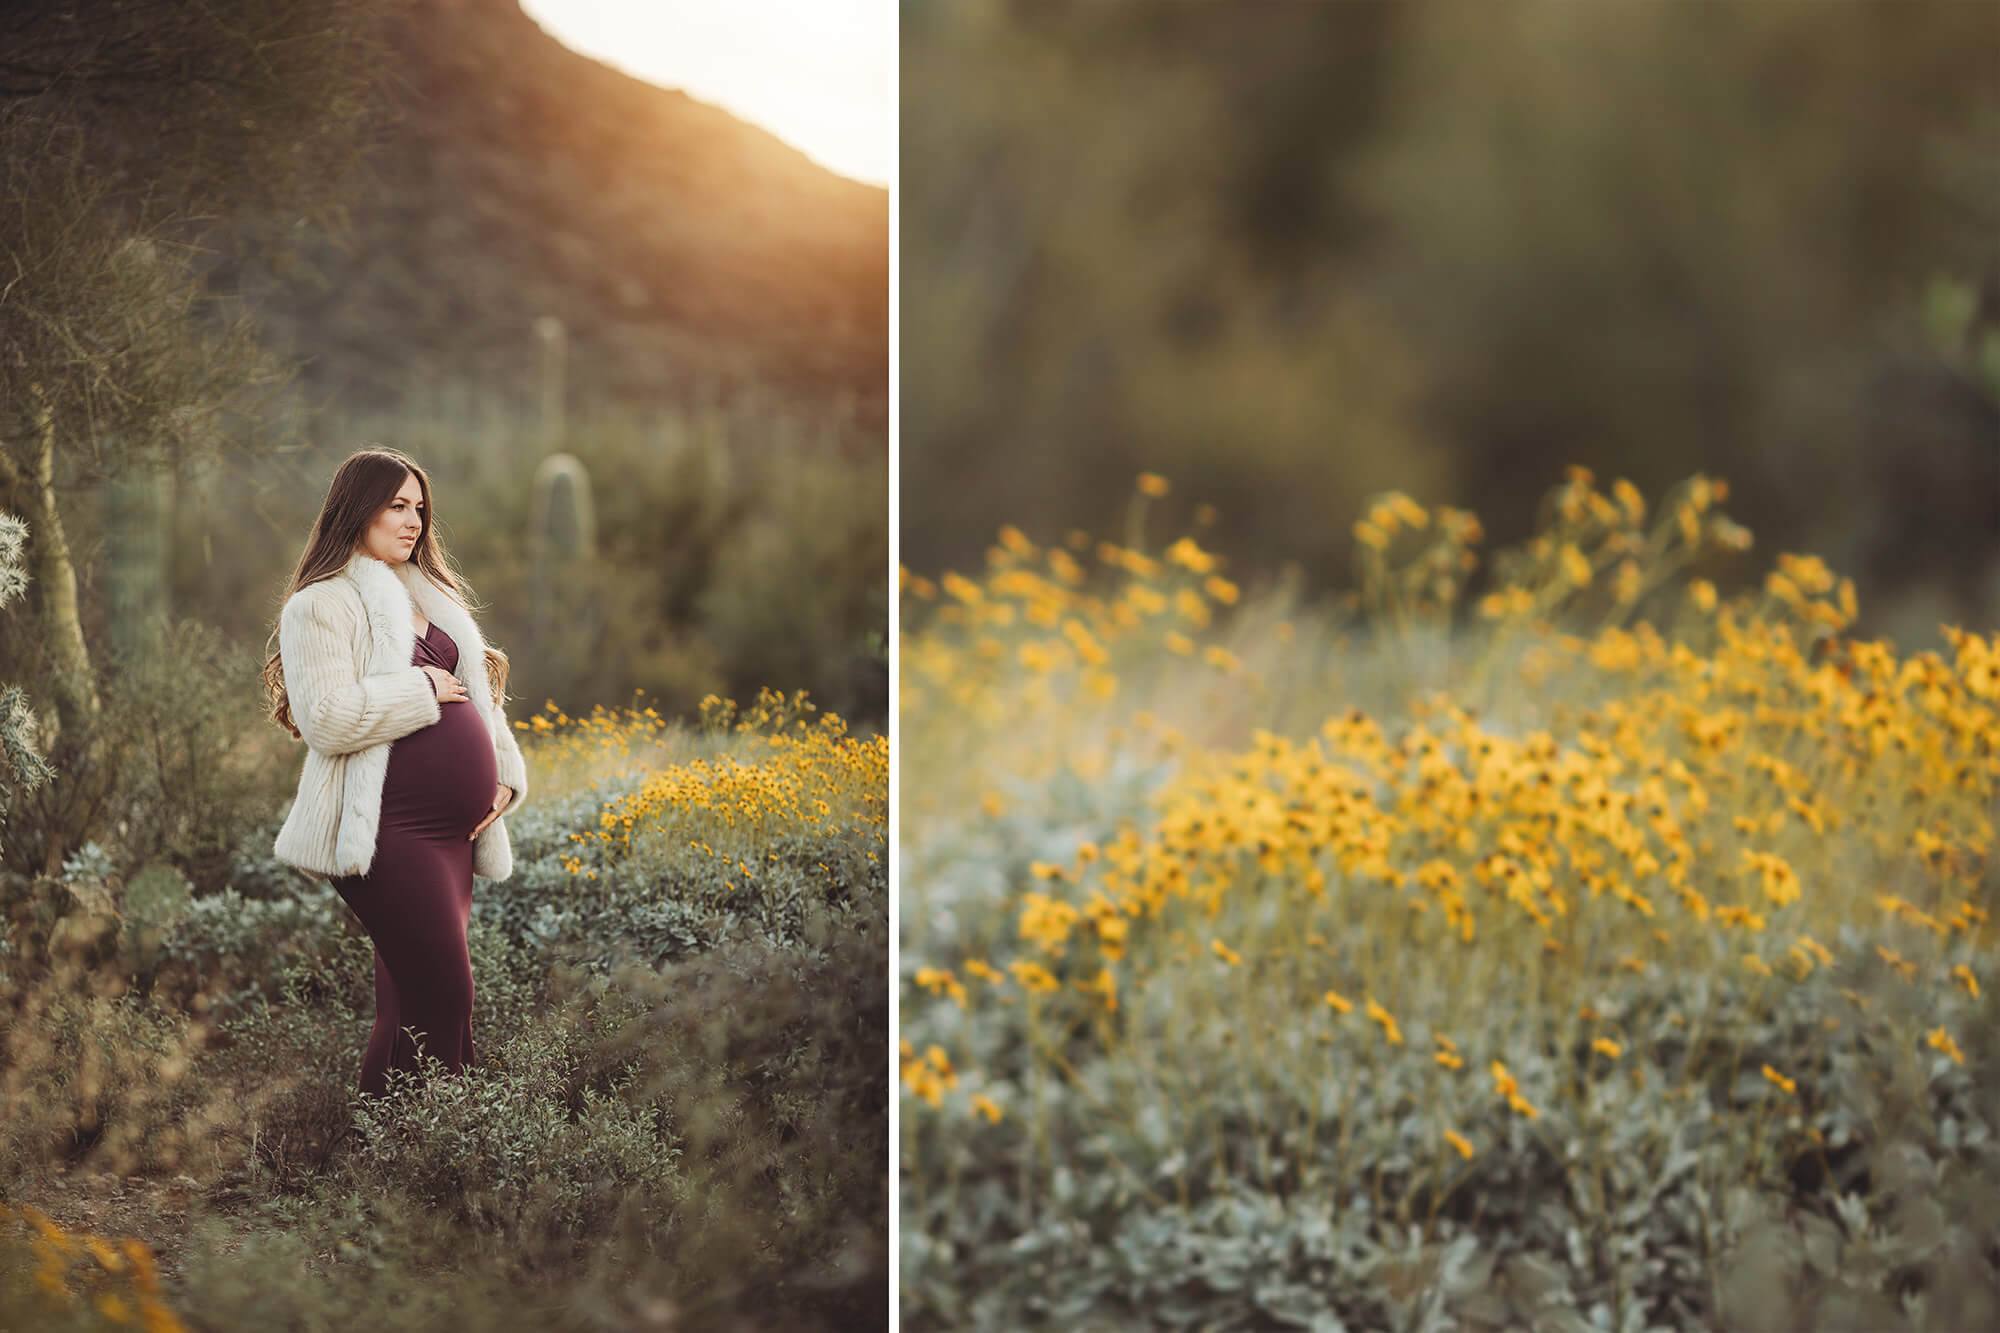 Even winter in Arizona yields flowers and we used them during Anica's sunrise maternity session near Tucson